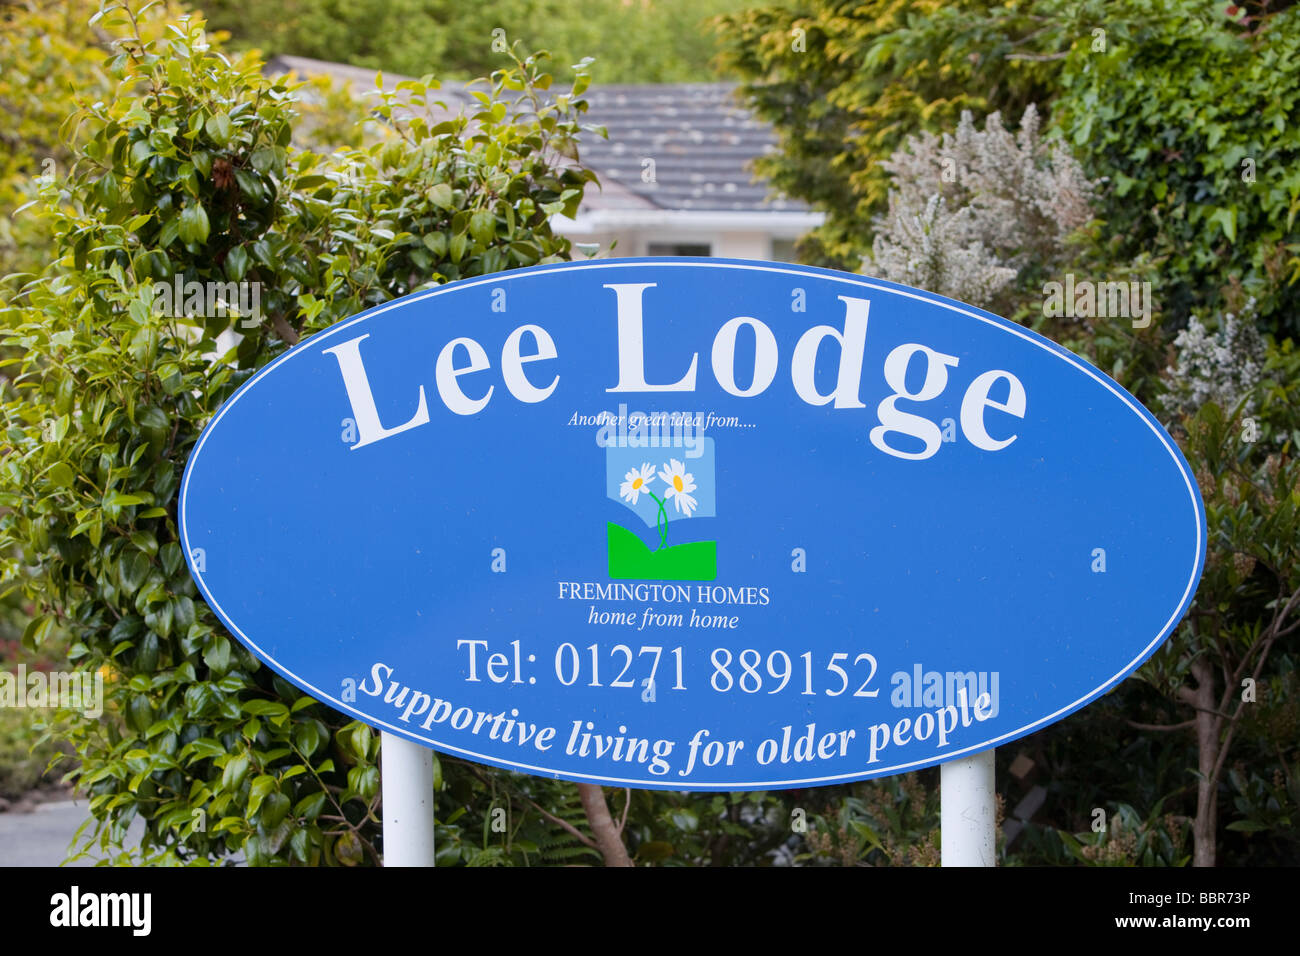 A sheltered housing complex for older people in Berrynarbor North Devon UK Stock Photo